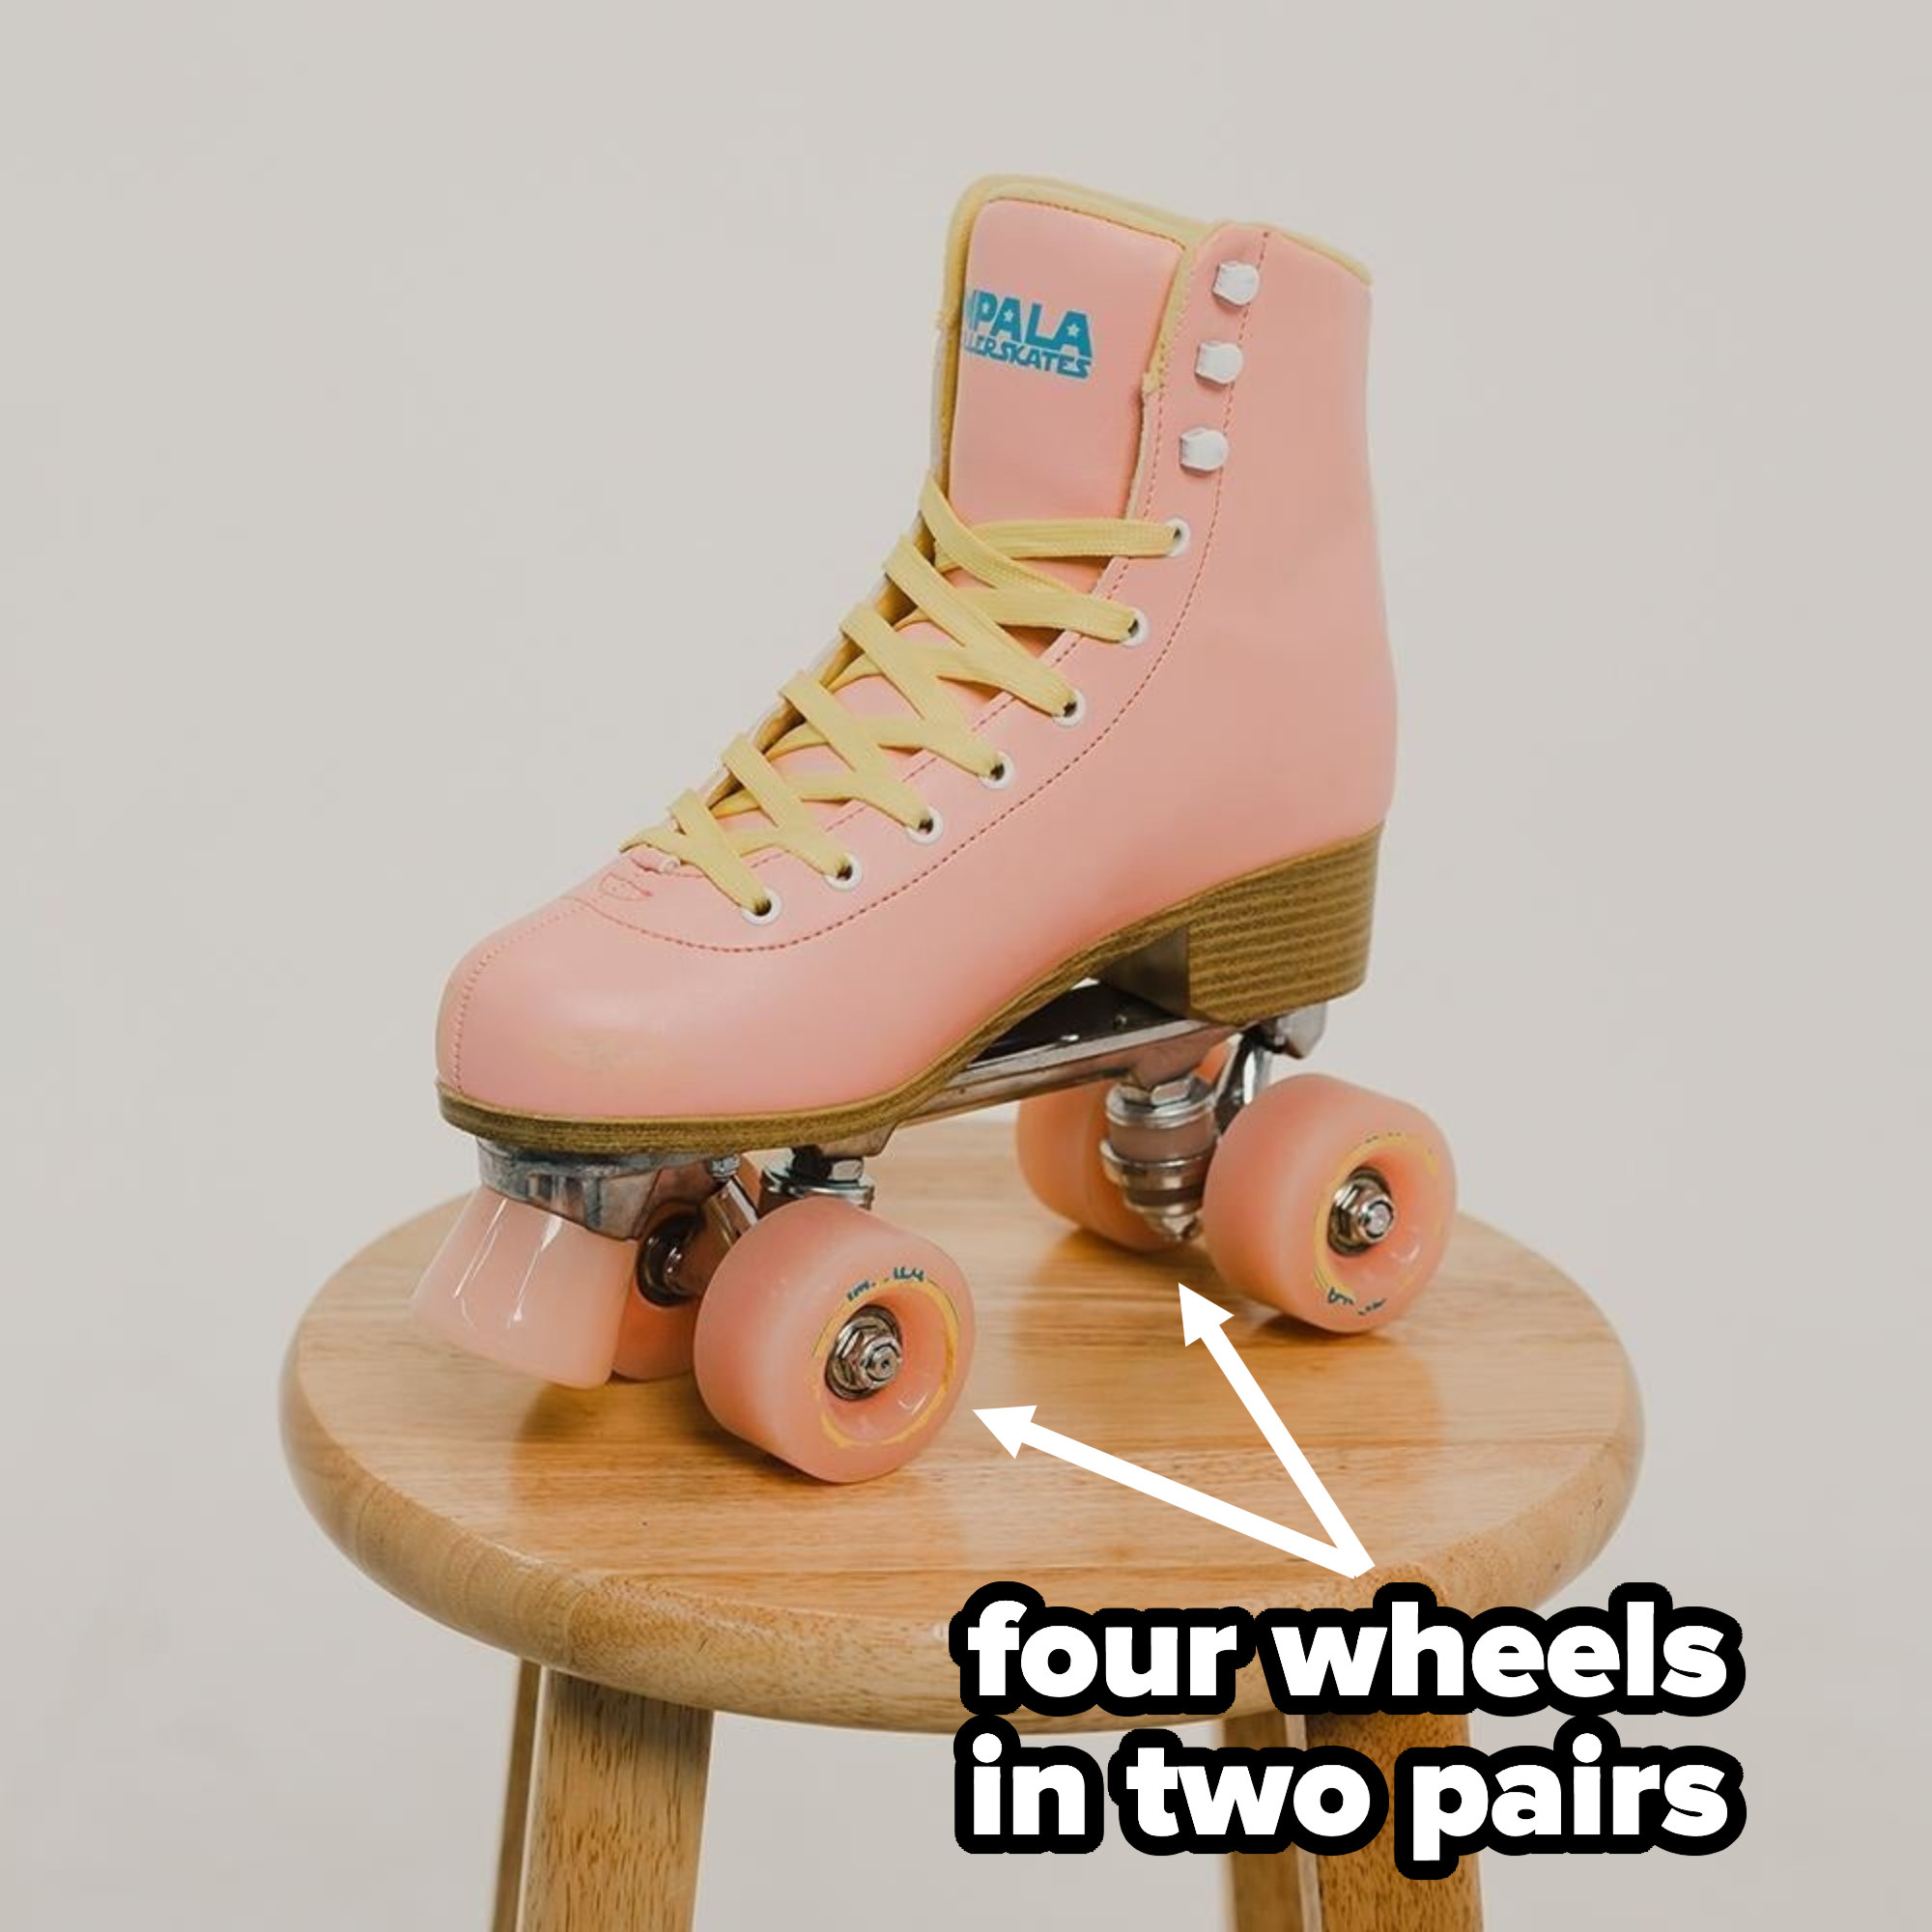 A roller skate with a toe stop sits on a stool